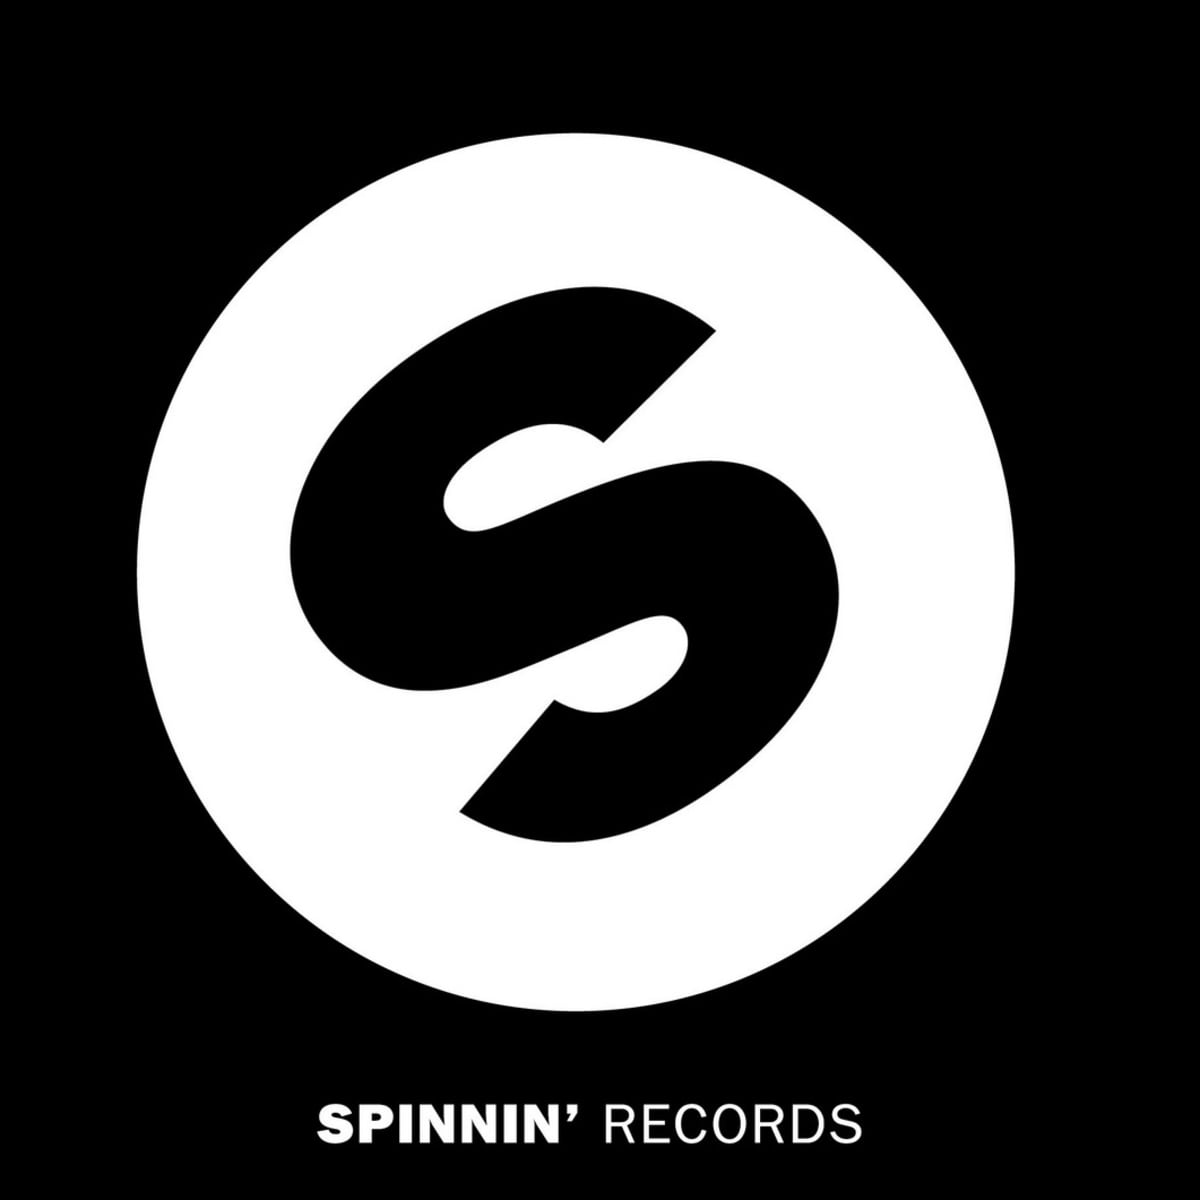 Spinnin' Records Celebrates 20 Million  Subscribers With This  Stellar Video -  - The Latest Electronic Dance Music News, Reviews &  Artists